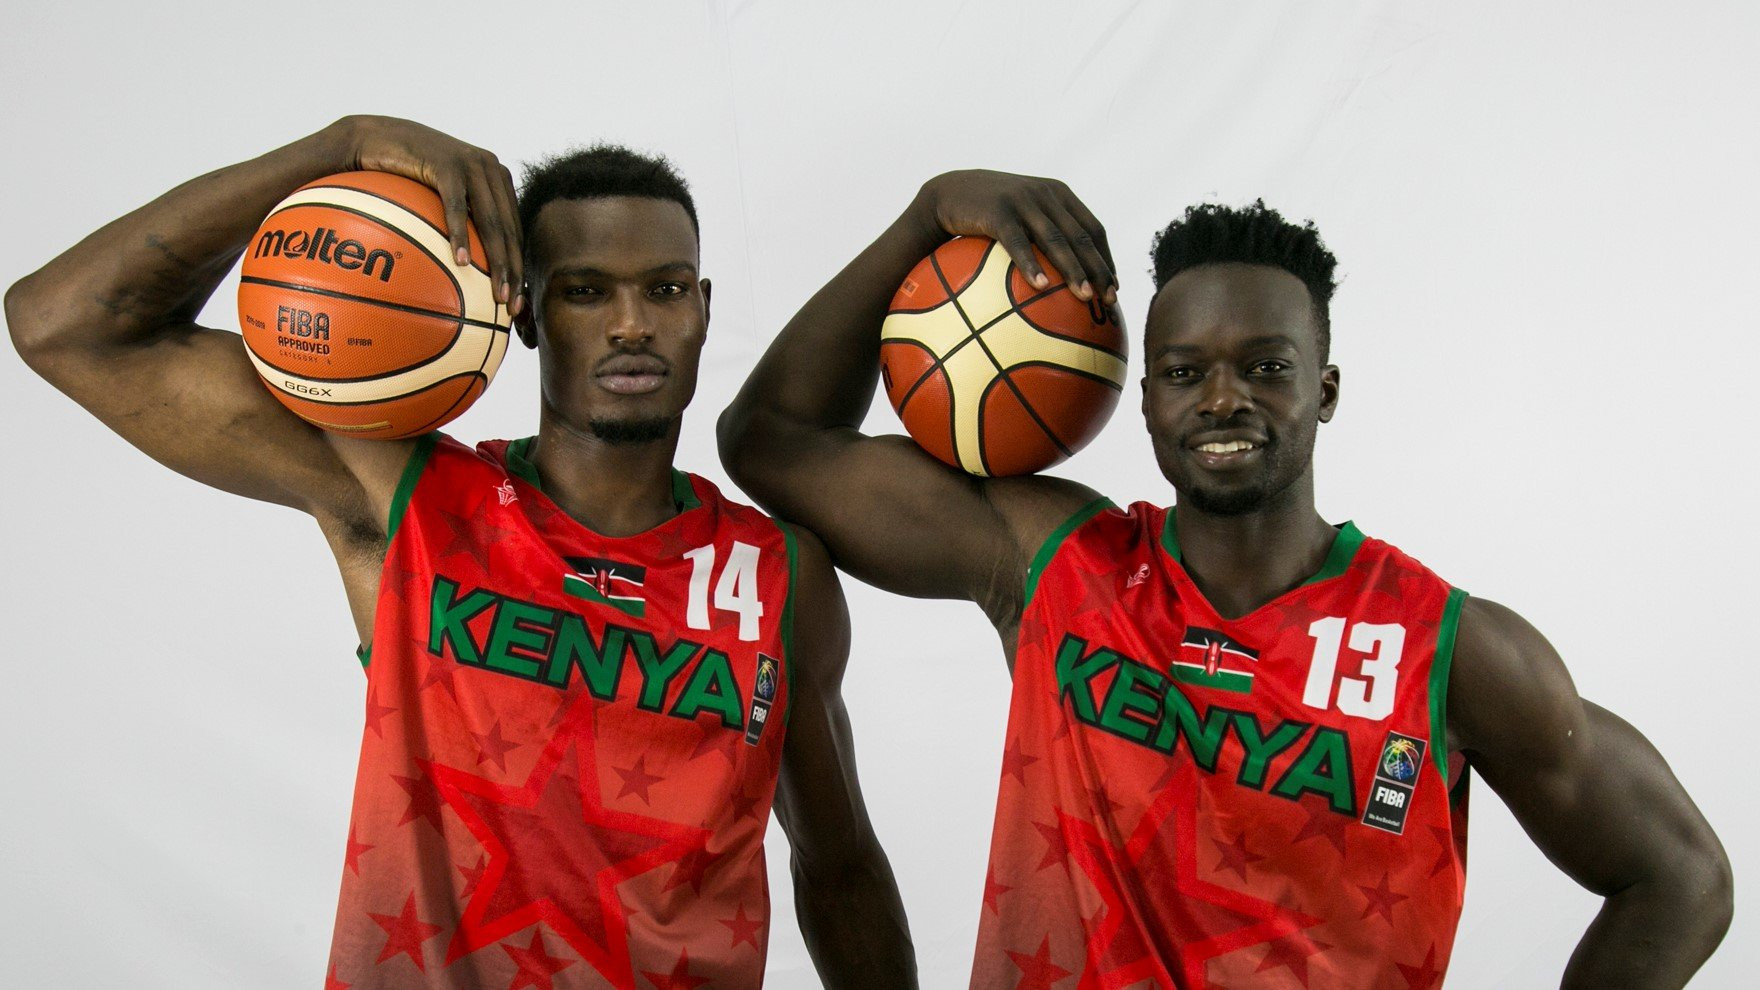 Morocco edge out Chad in FIBA AfroCan opener